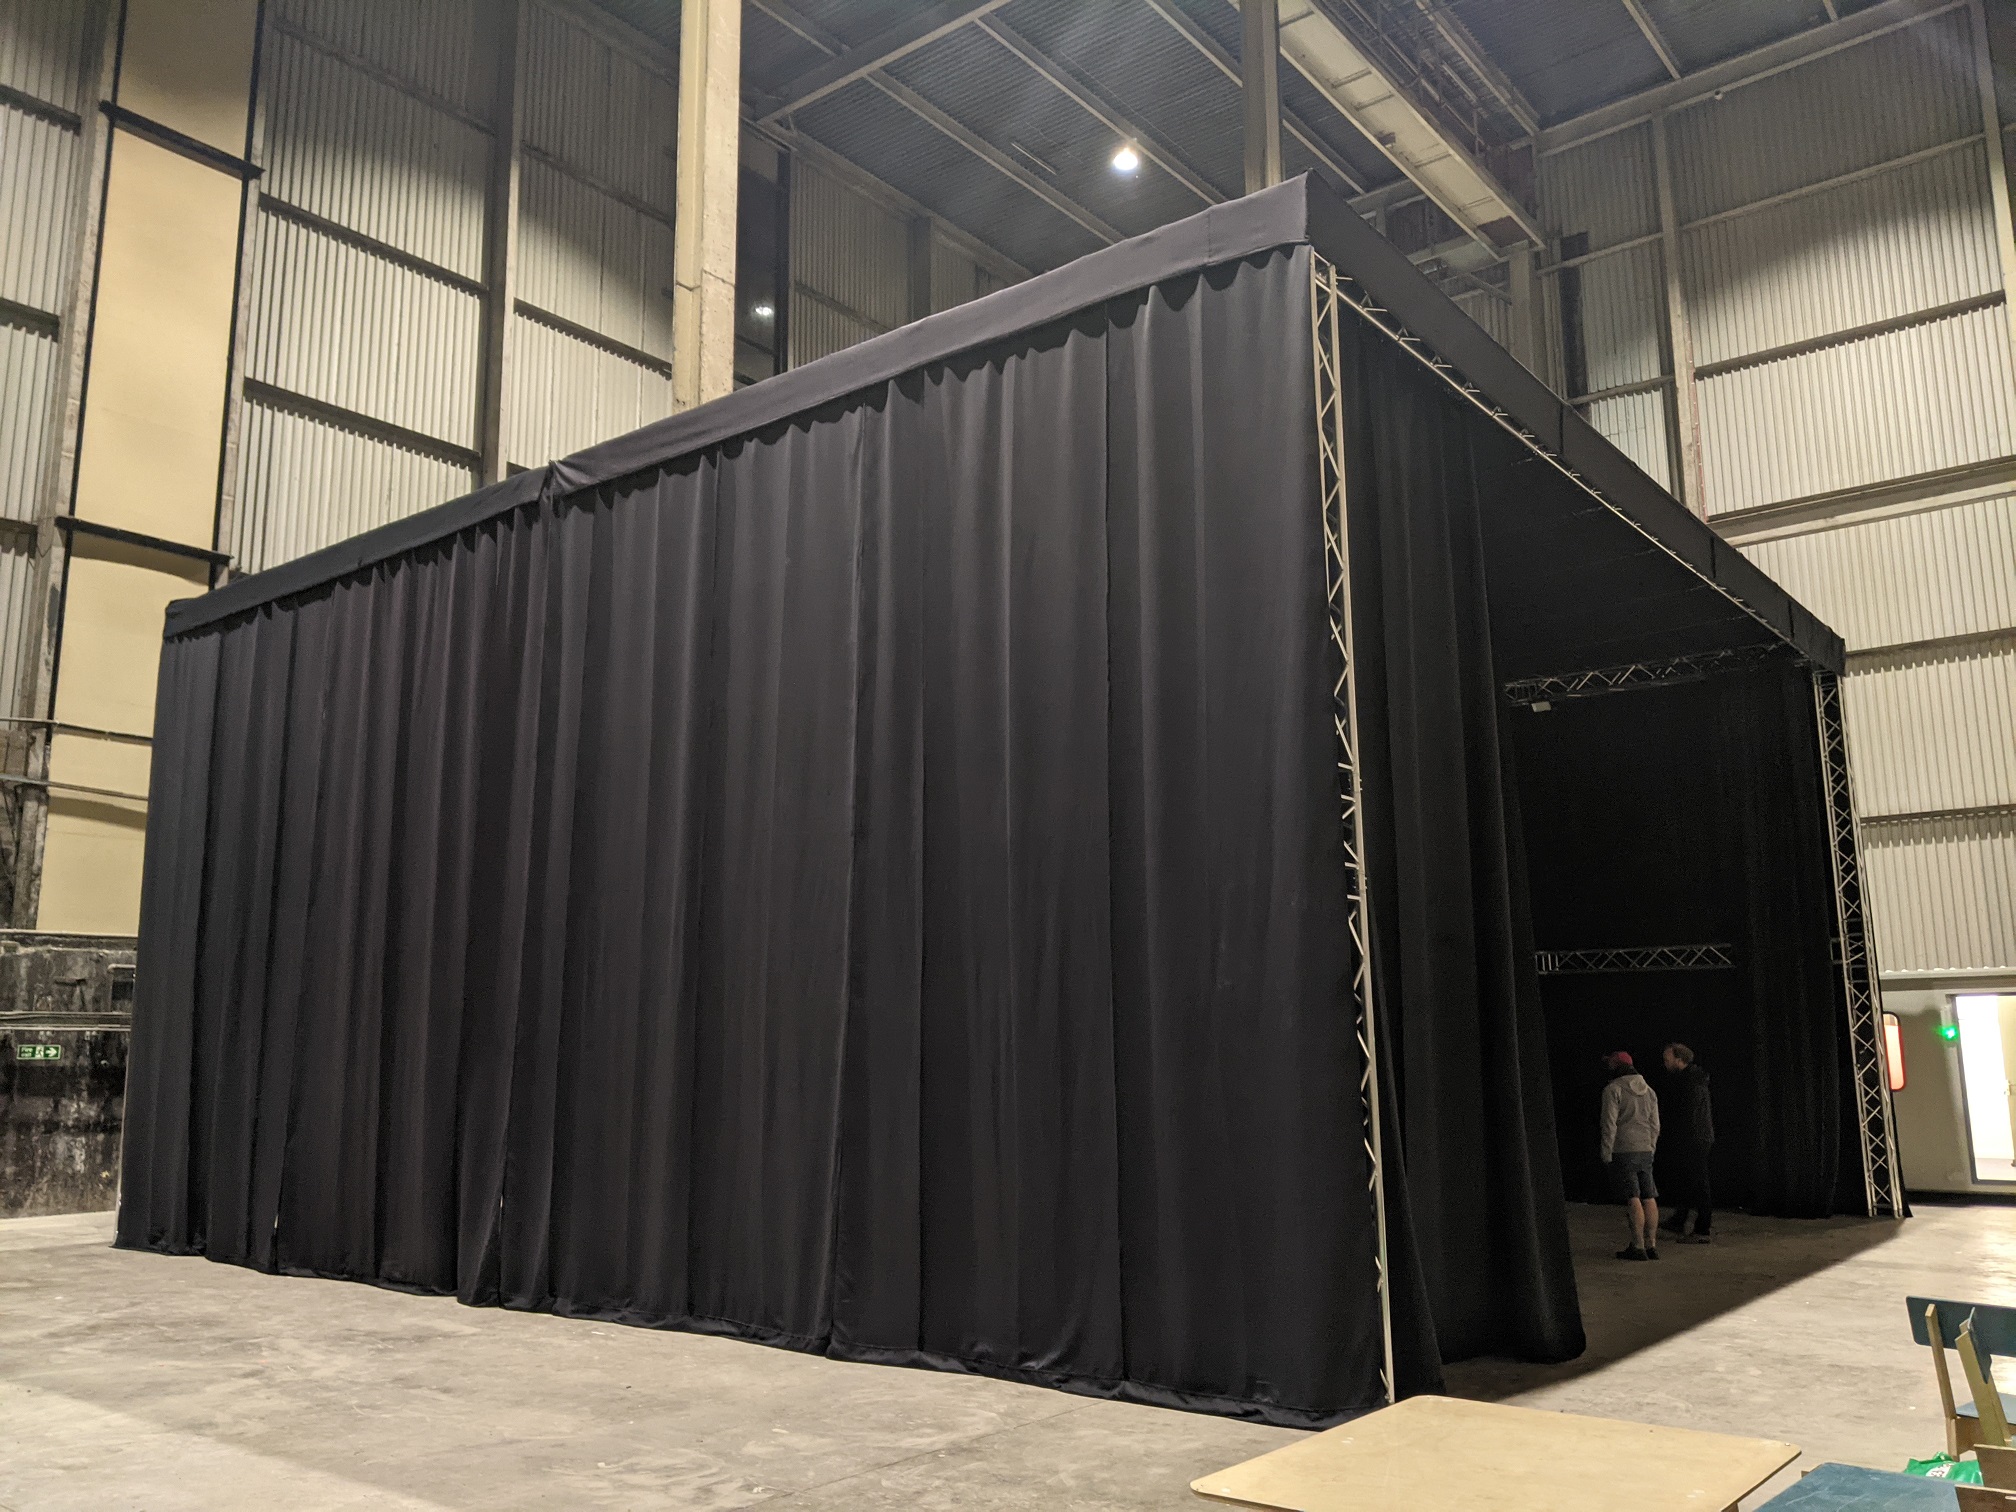 CAMERA's new Motion Capture Innovation Studio at The Bottle Yard is soon to be unveiled